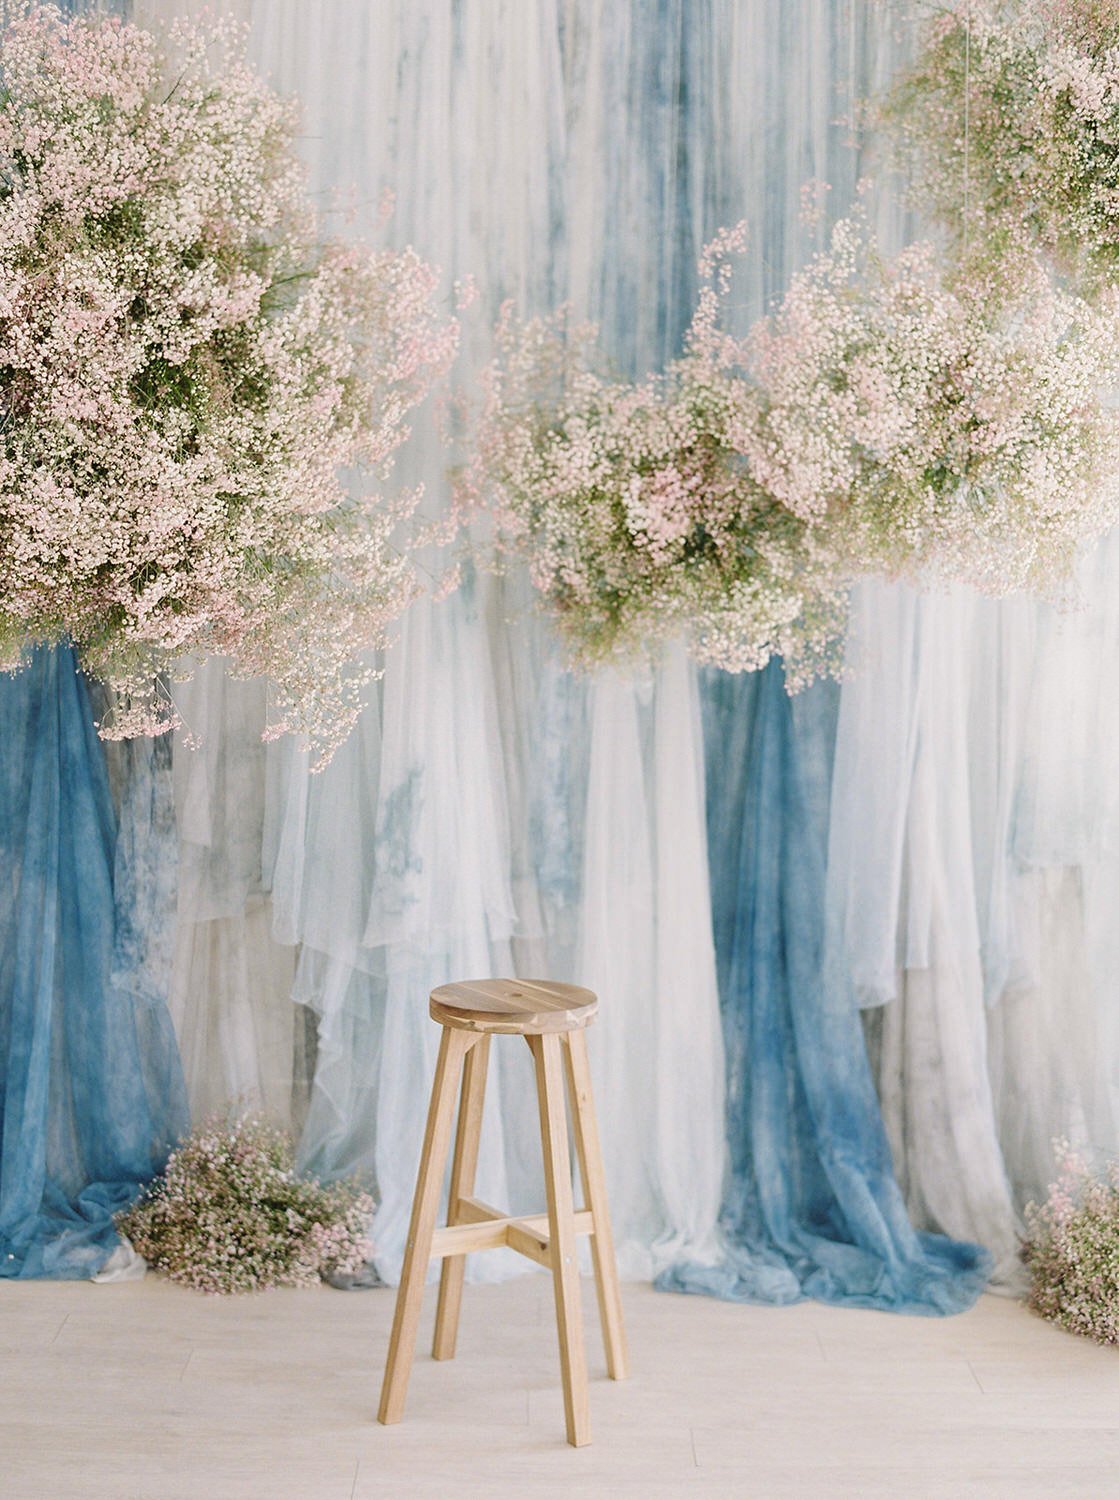  Sapphire Mist, Silver Wind and Misty Blue ・  Justine Milton Photography  ・  Flower Artistry  